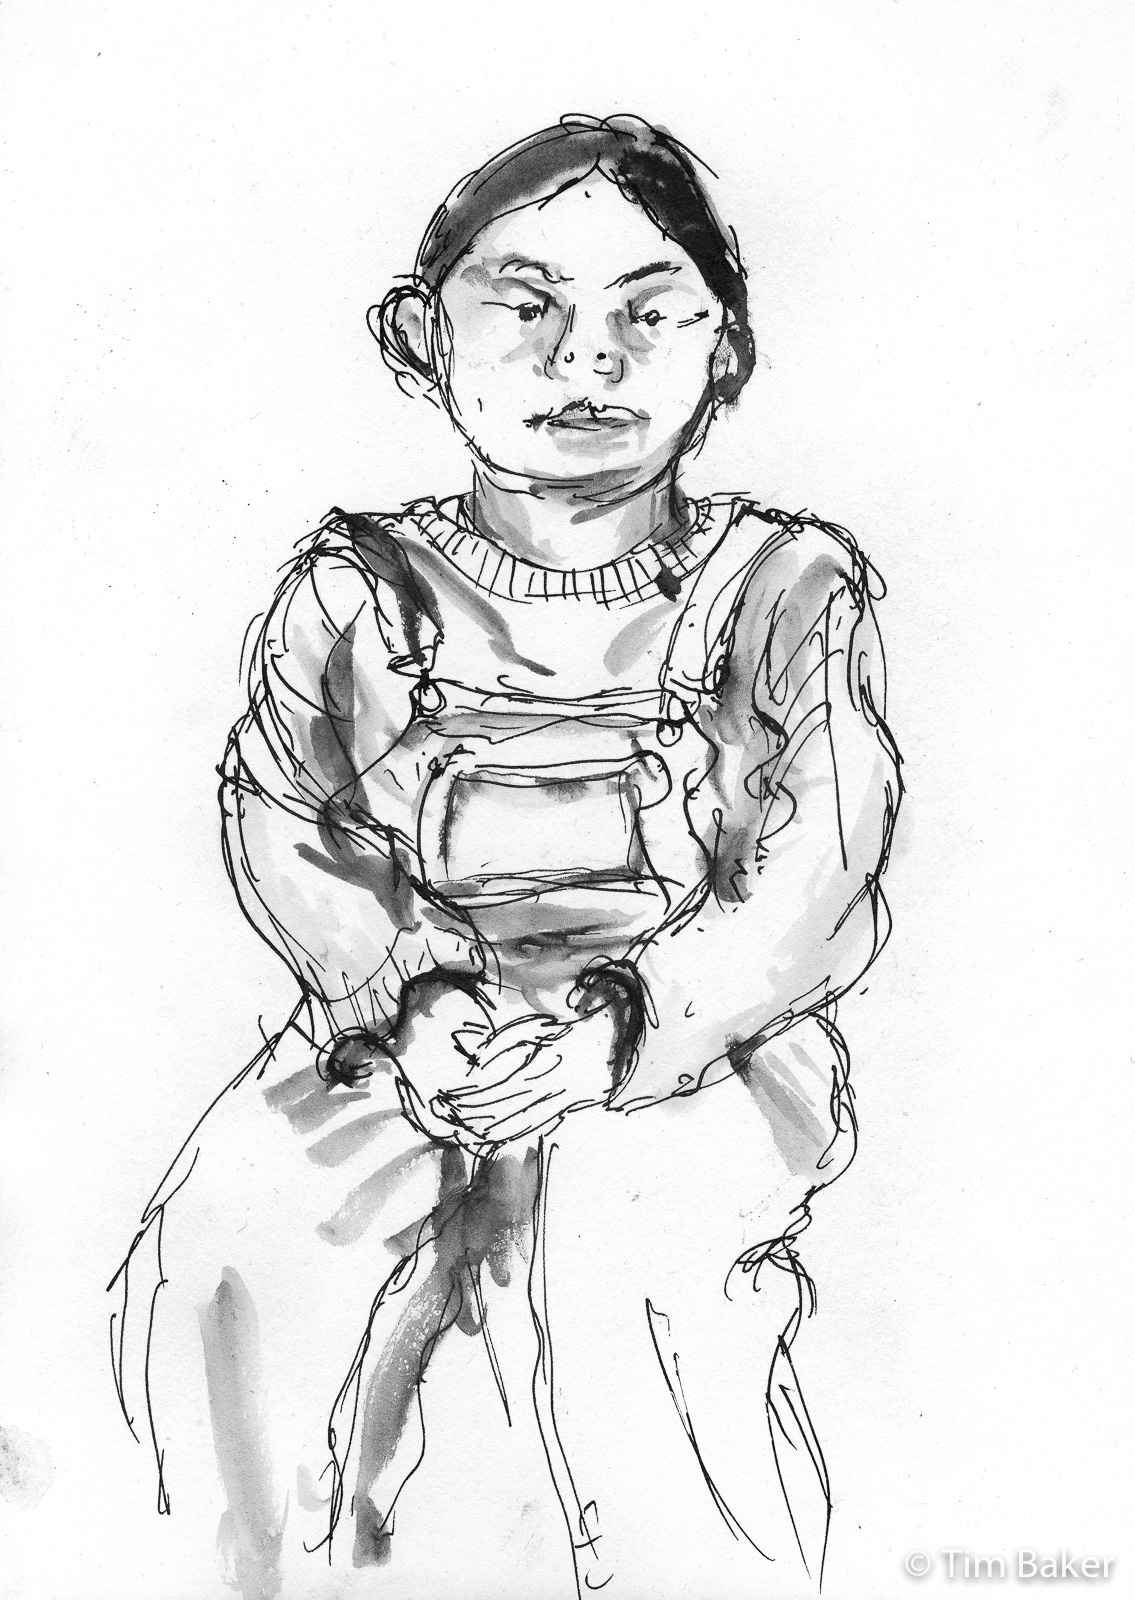 Phoebe, Portraits At The Pub, Fountain Pen and wash, A4 Artway Flat White sketchbook.